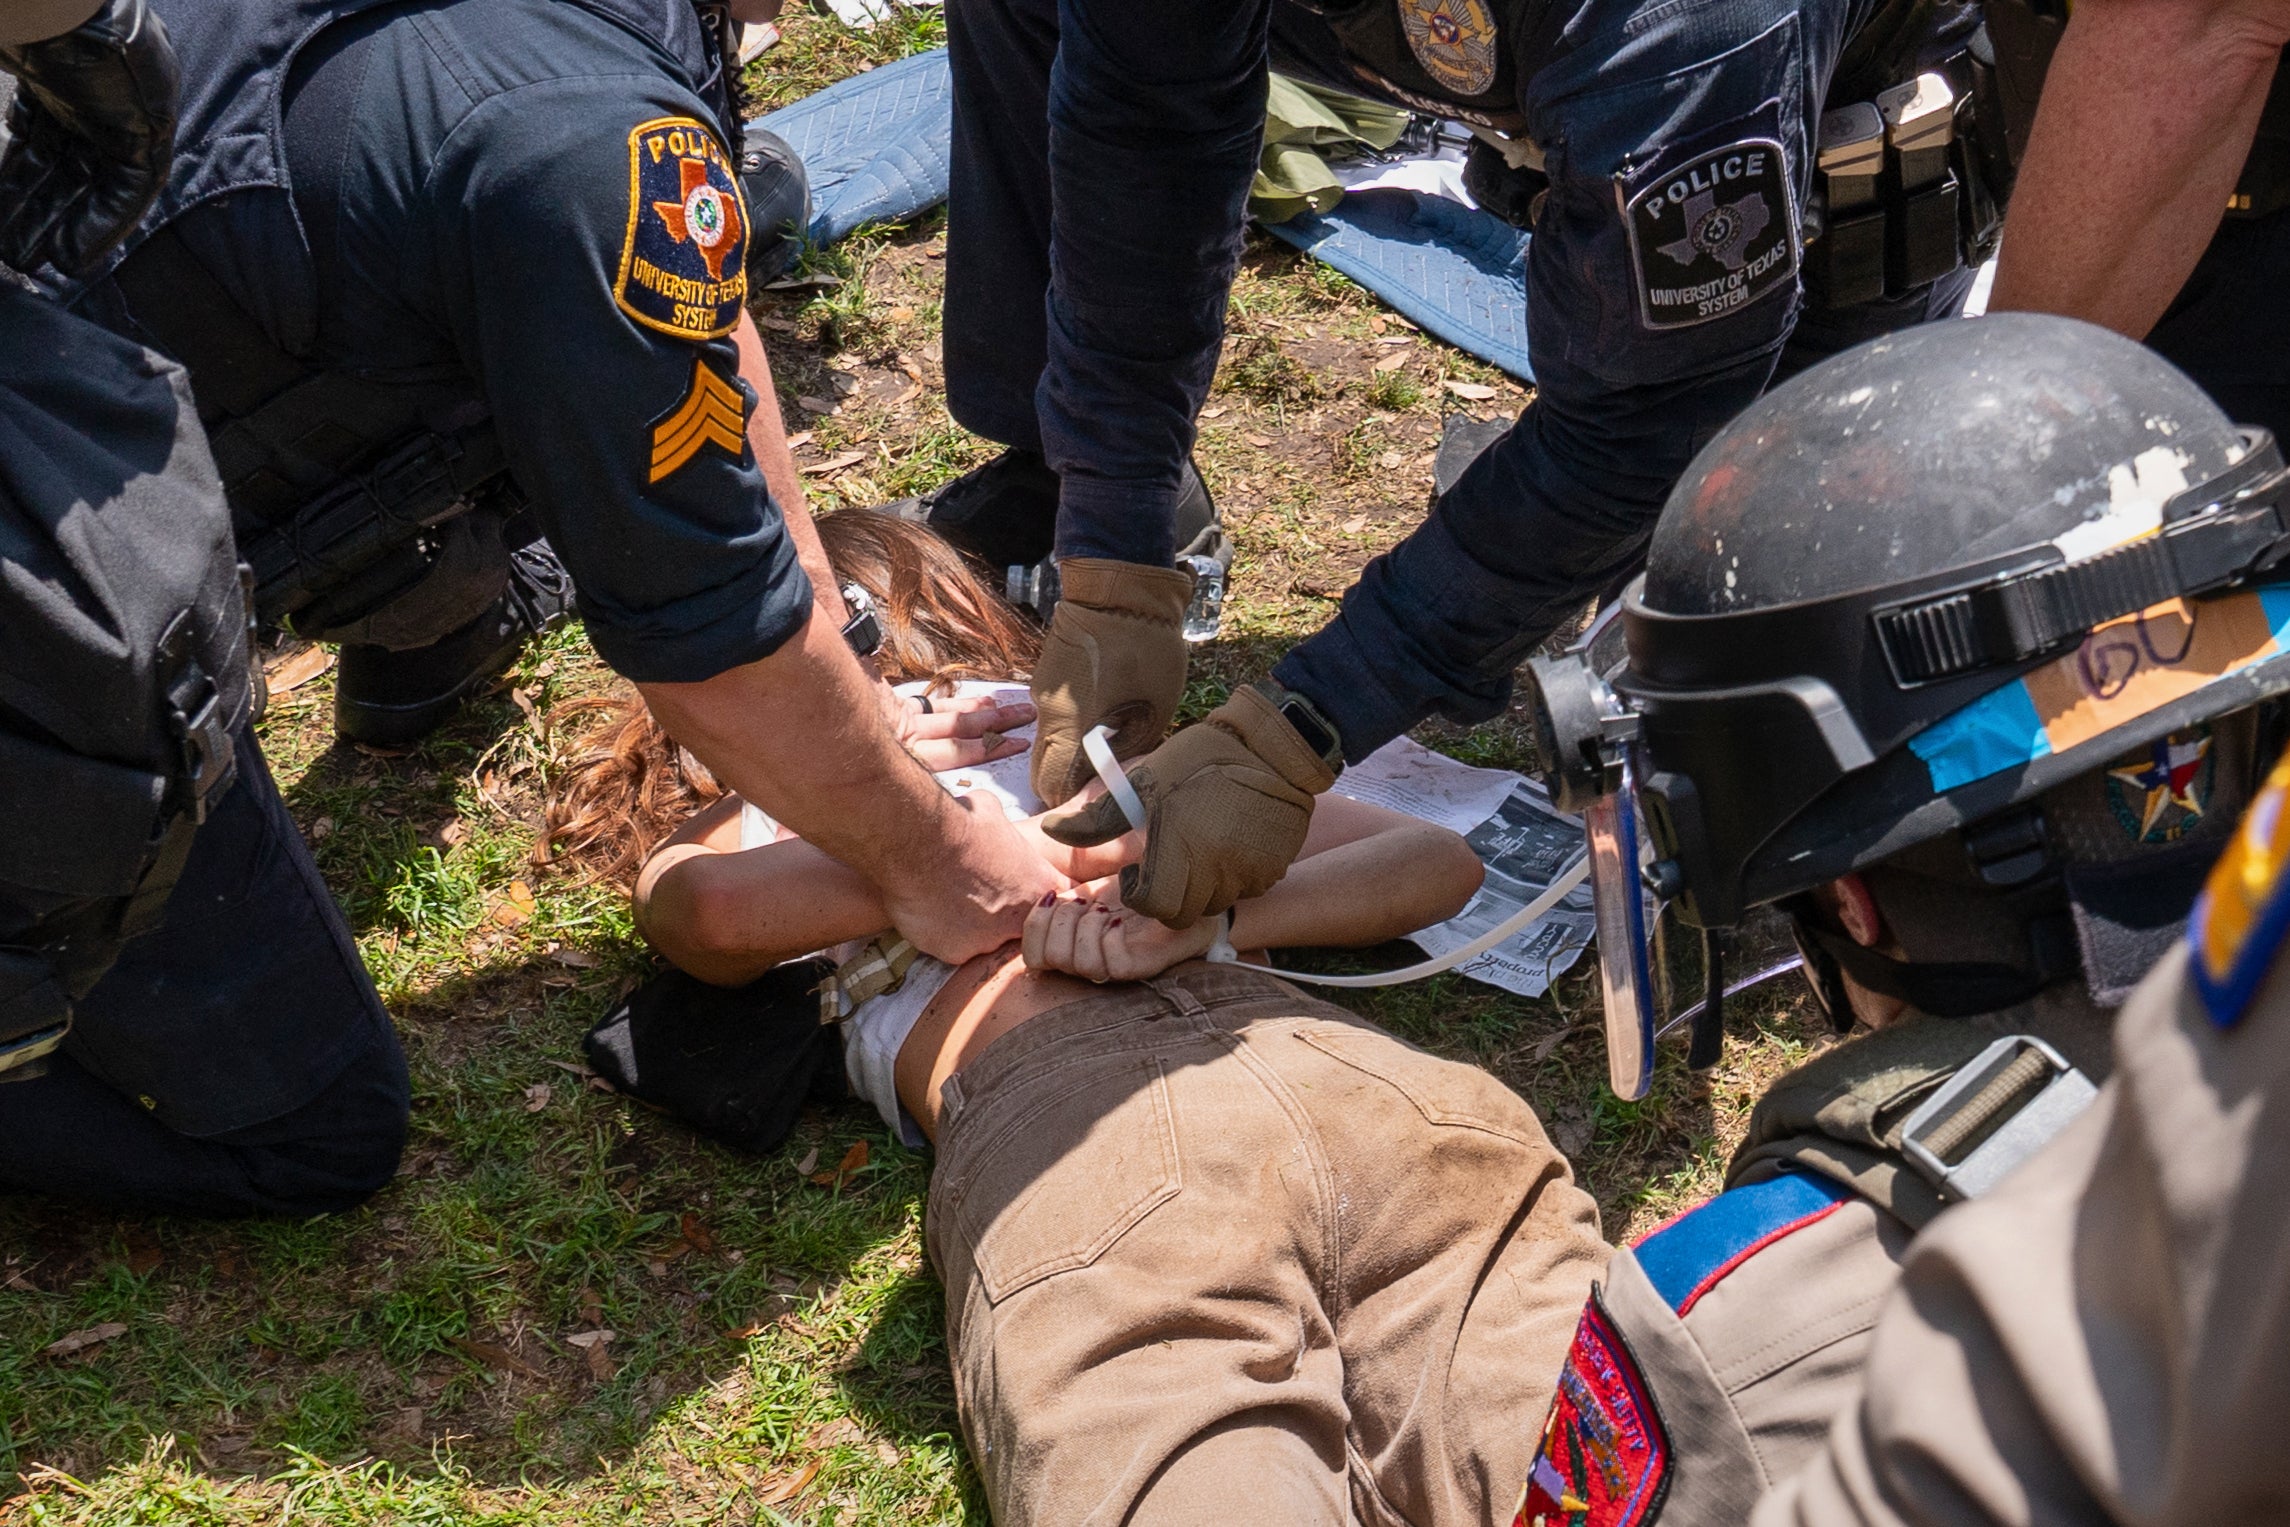 Three (3) law enforcement officers hold a protestor on the ground in a face down position as the officers bind the student’s hands behind their back with zipties